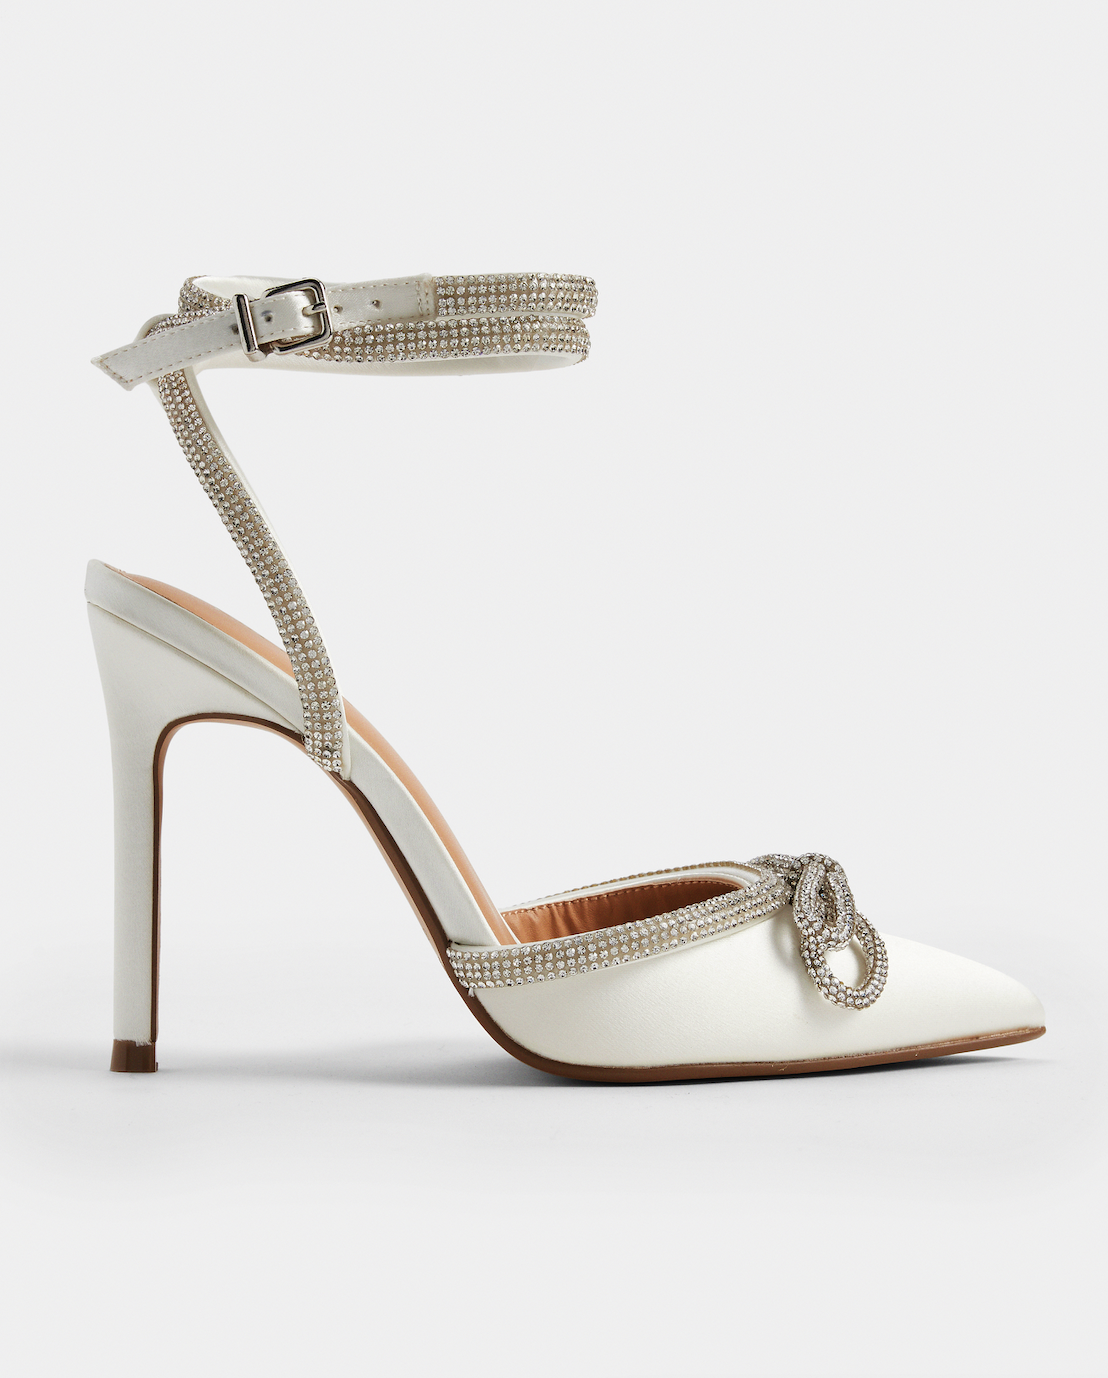 White close-toed heels with diamond strap and embellishments